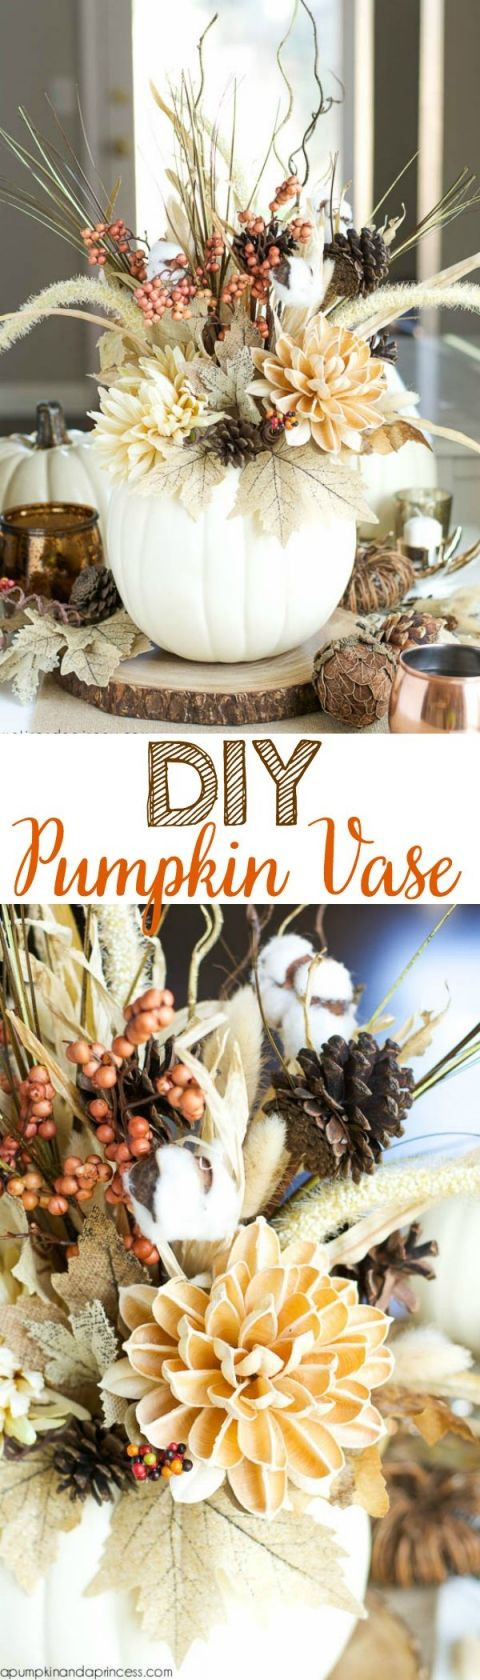 24 Unique White Pumpkin Vase Filler 2024 free download white pumpkin vase filler of diy pumpkin vase best of pinterest pinterest fall decor fall intended for how to make a pumpkin vase out of a faux white pumpkin